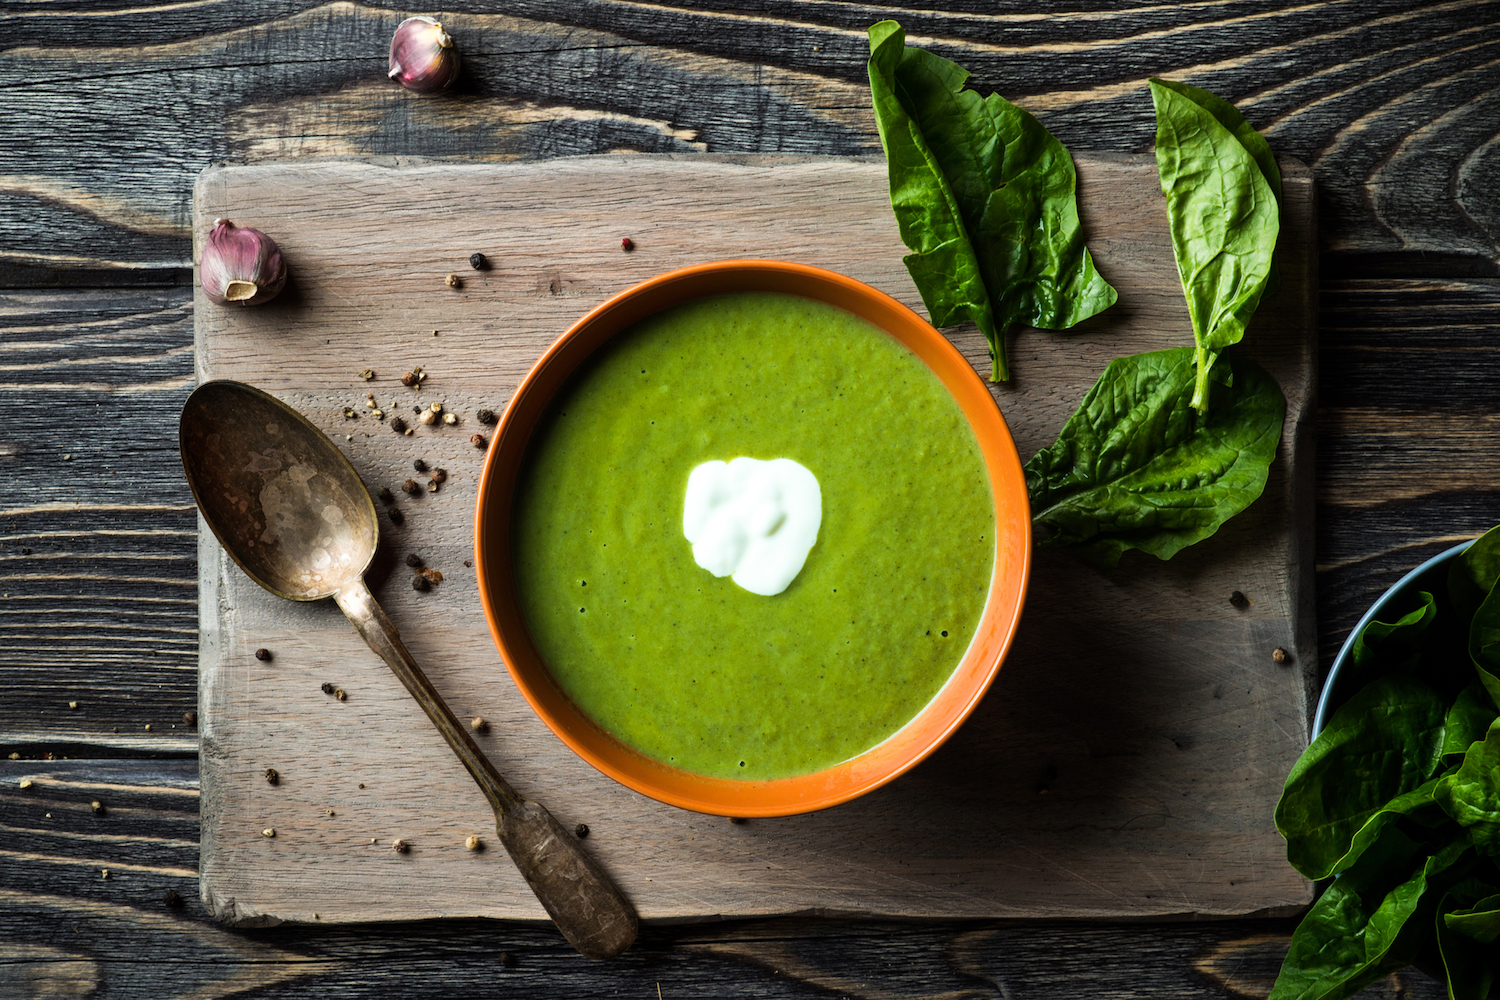 Green spinach soup